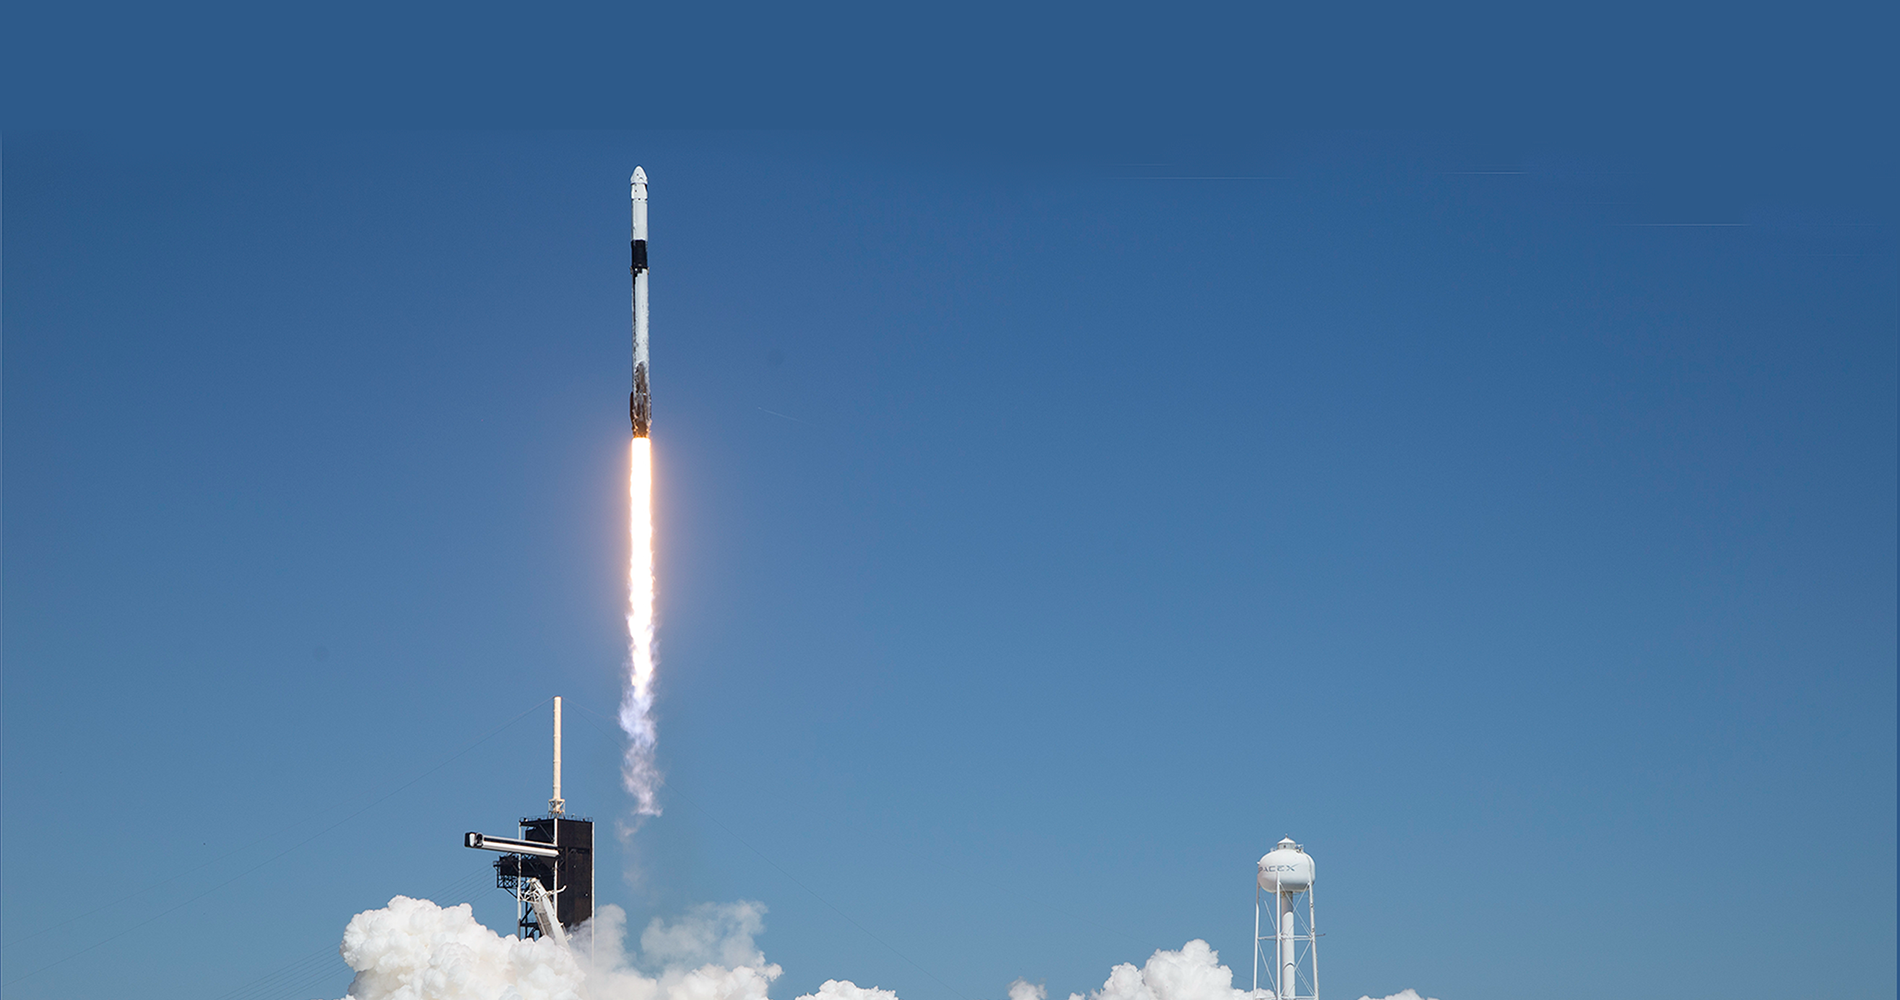 AIAA Statement on the Axiom Mission 1 (AX-1) Launch